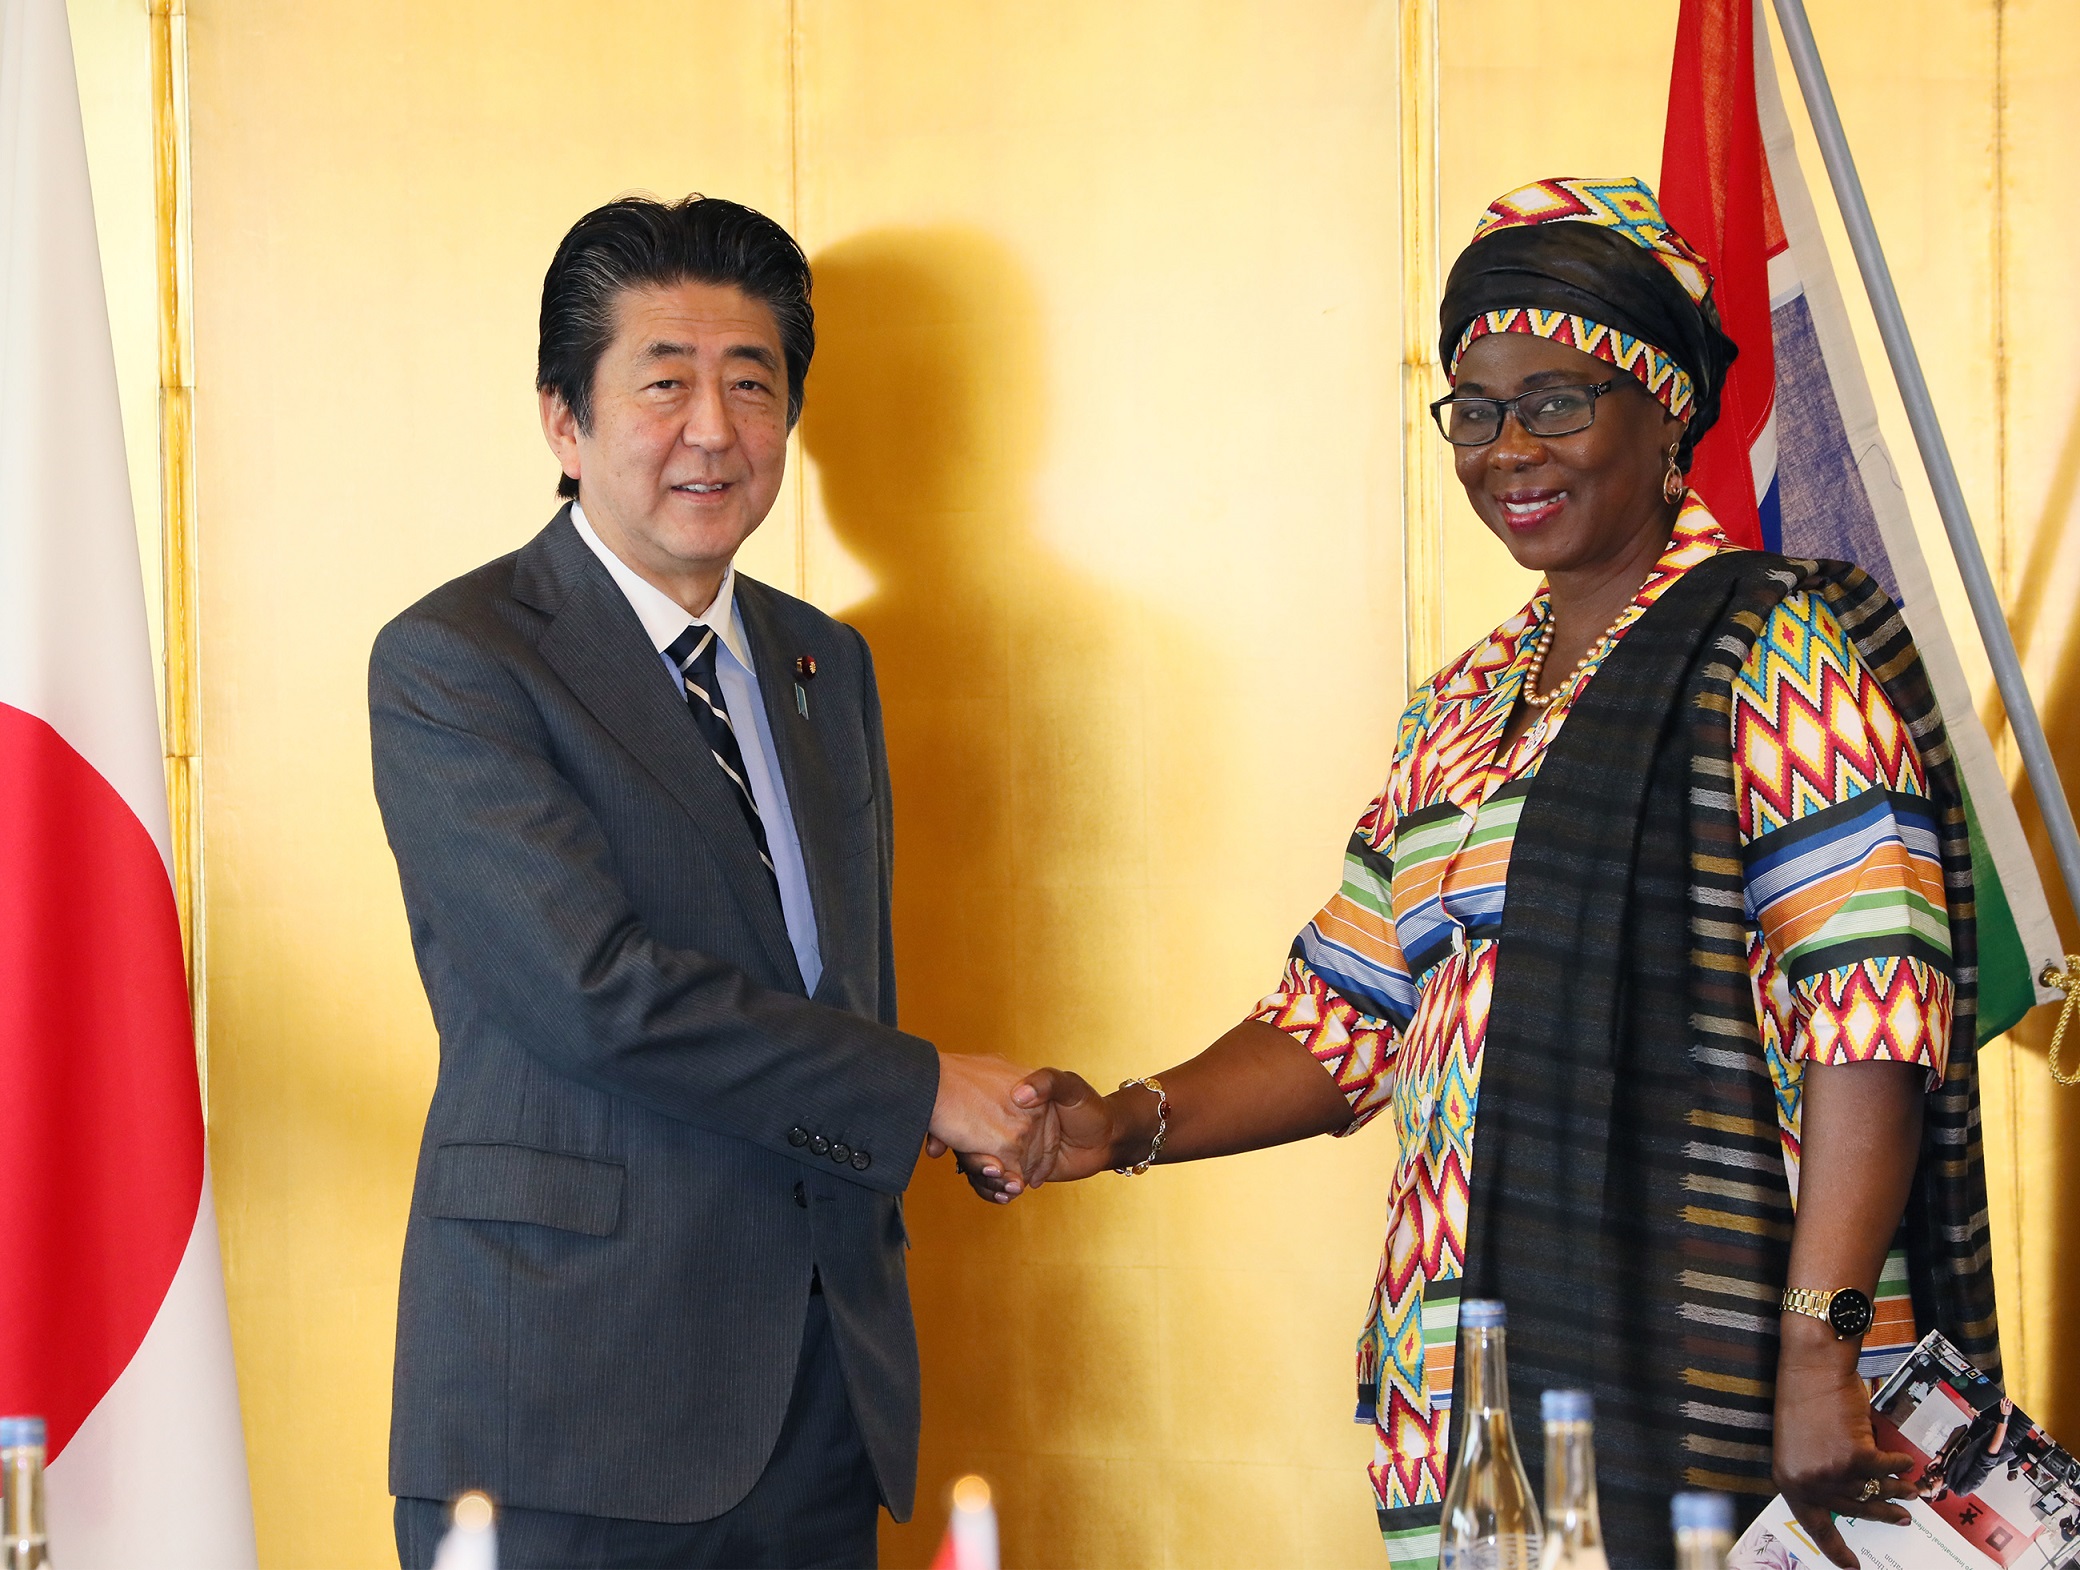 Photograph of the courtesy call from the Vice-President of The Gambia